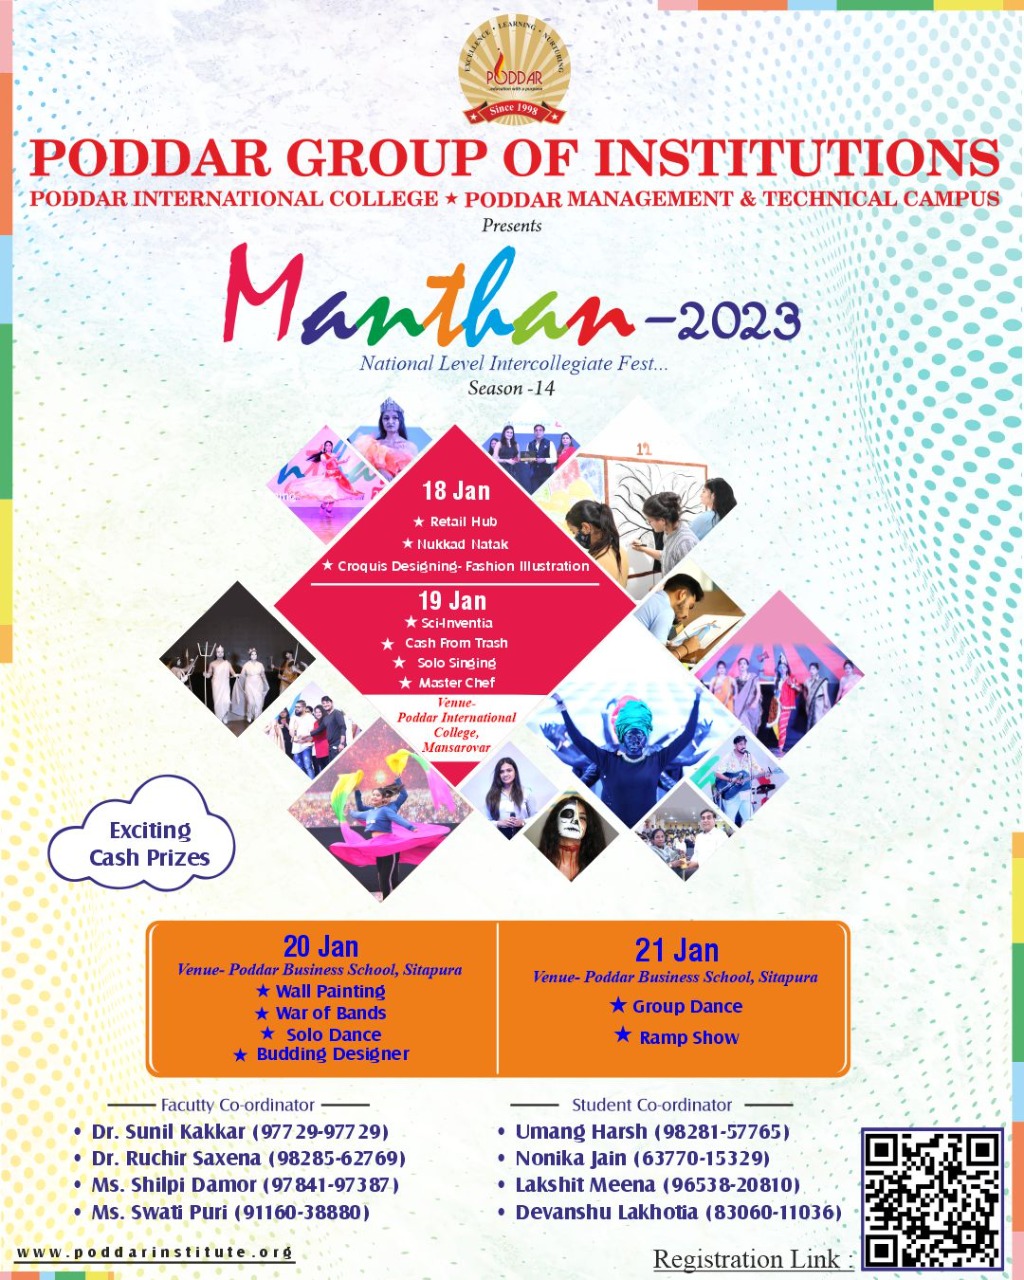 www.poddarbschool.com/our-events/register-now/manthan-2023